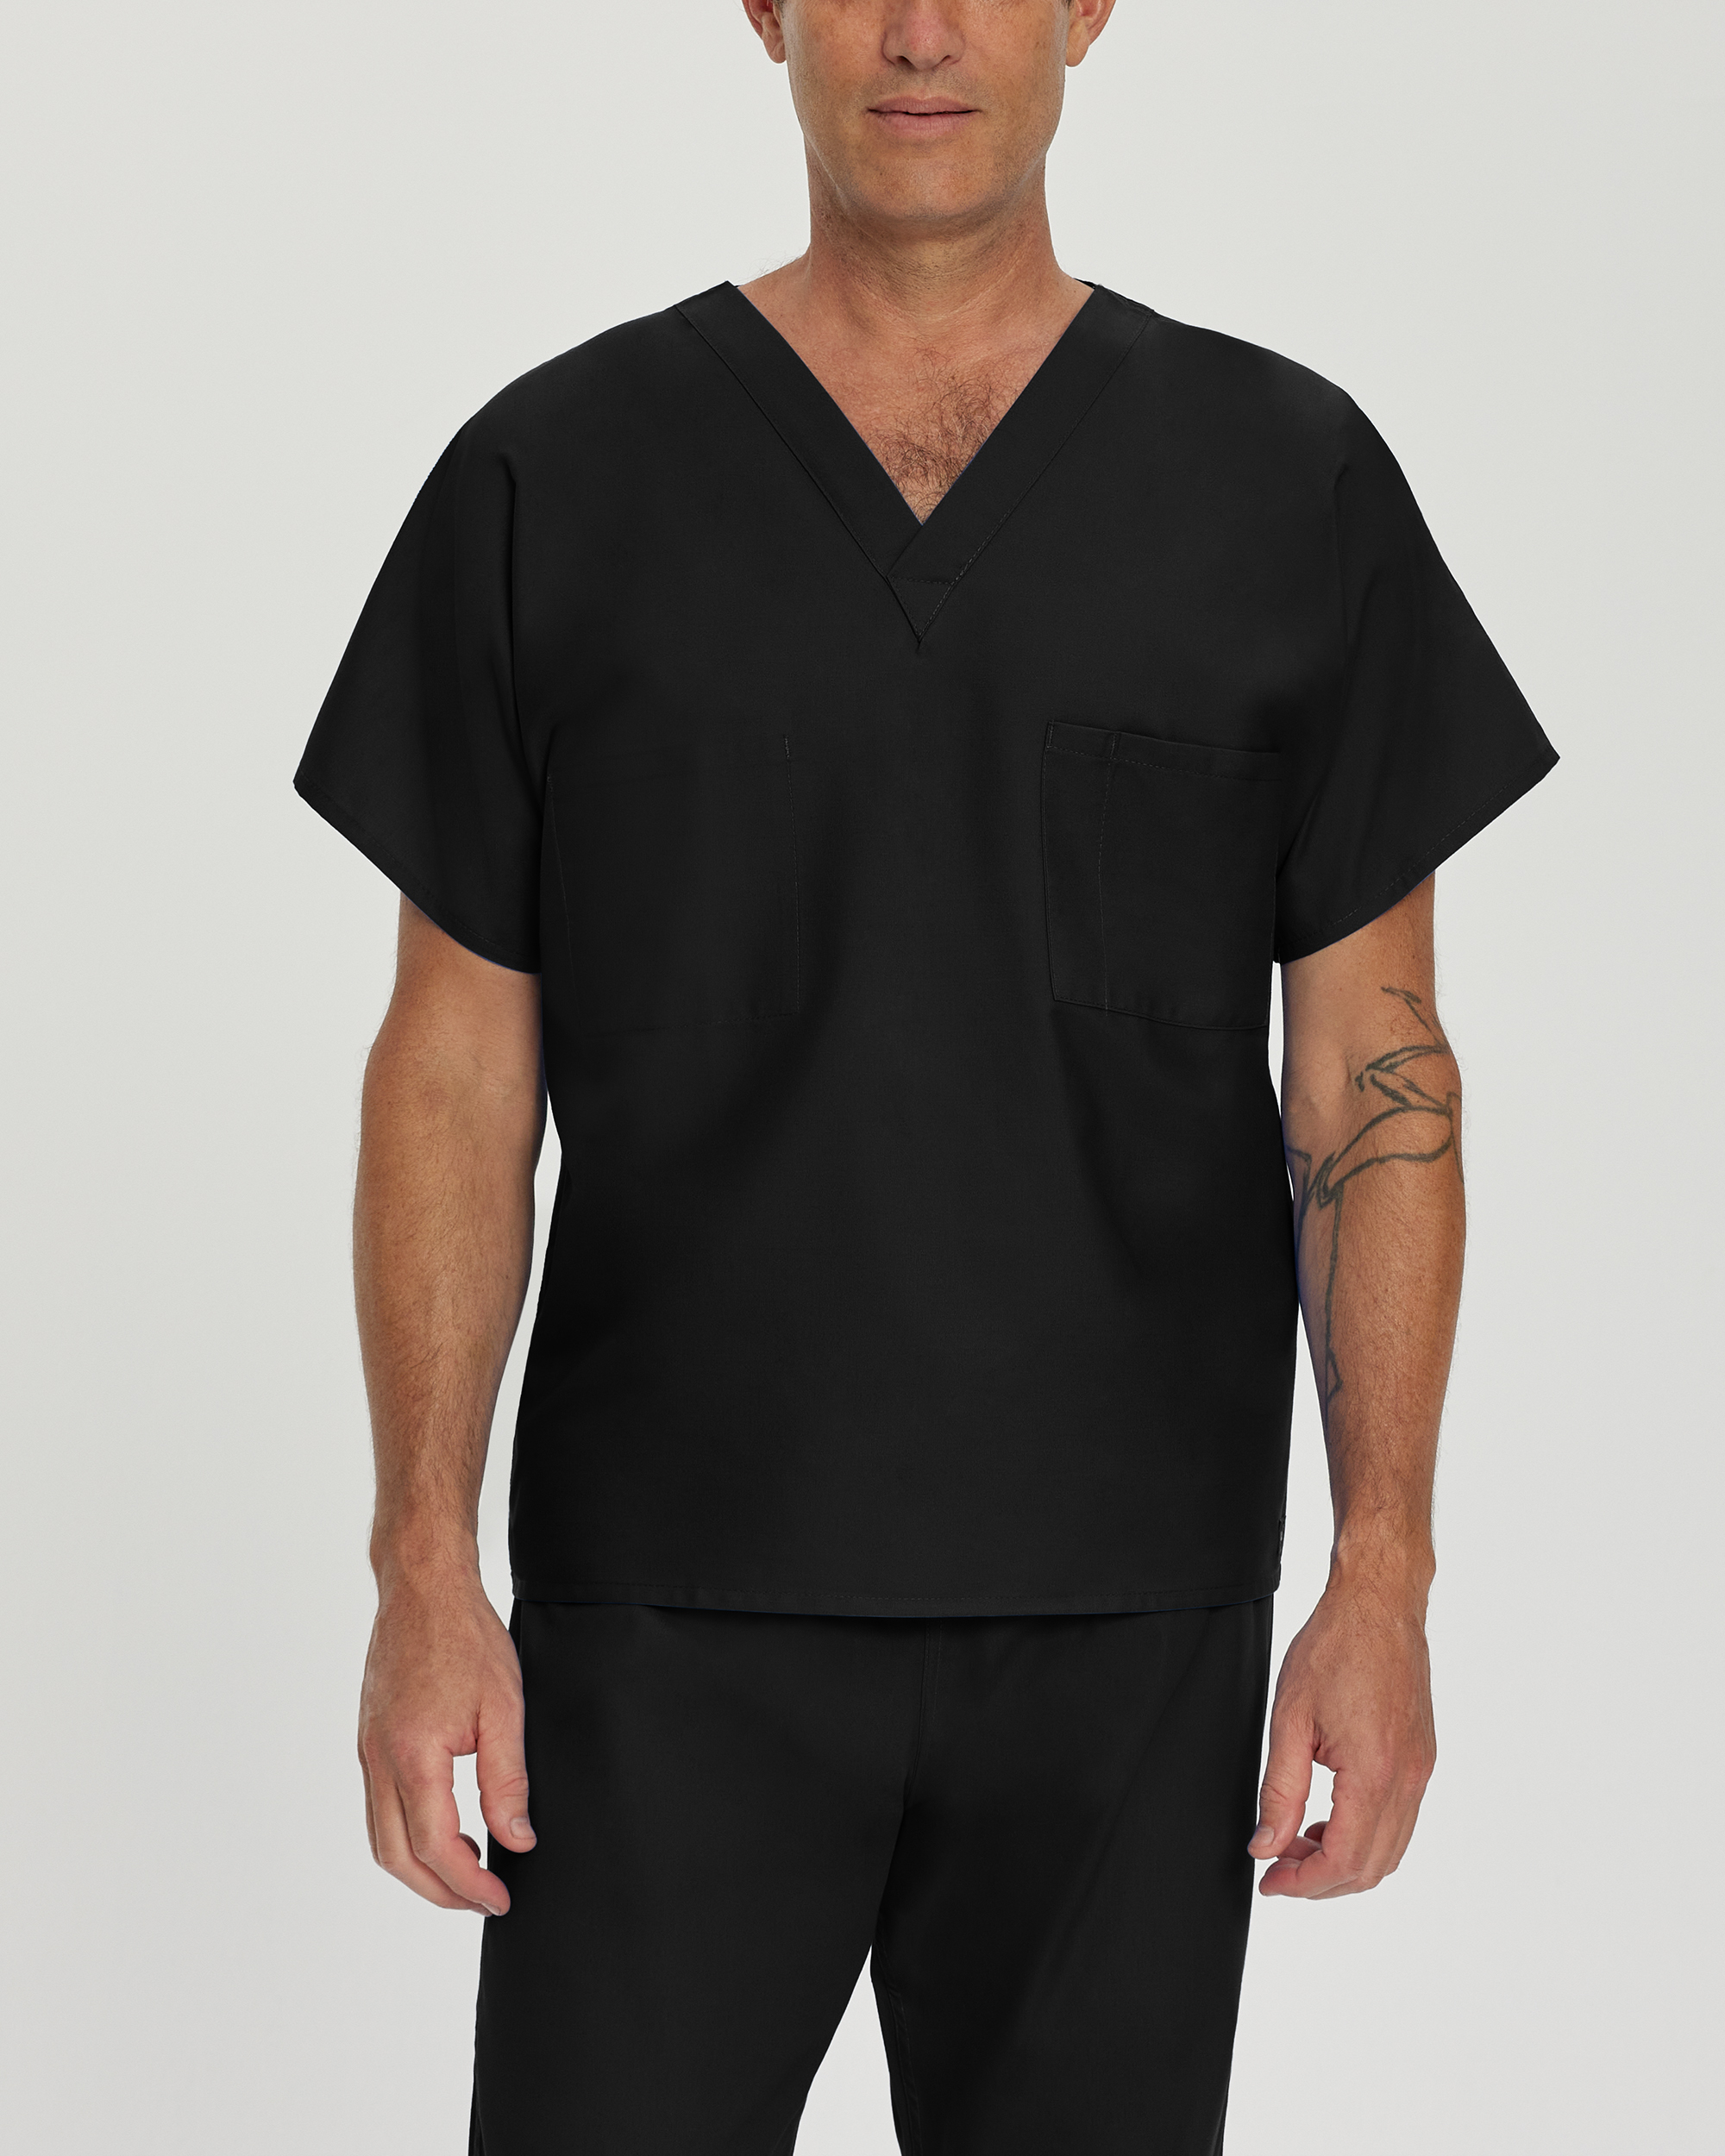 Where is the 1 pocket scrub top by Landau V-neck manufactured?